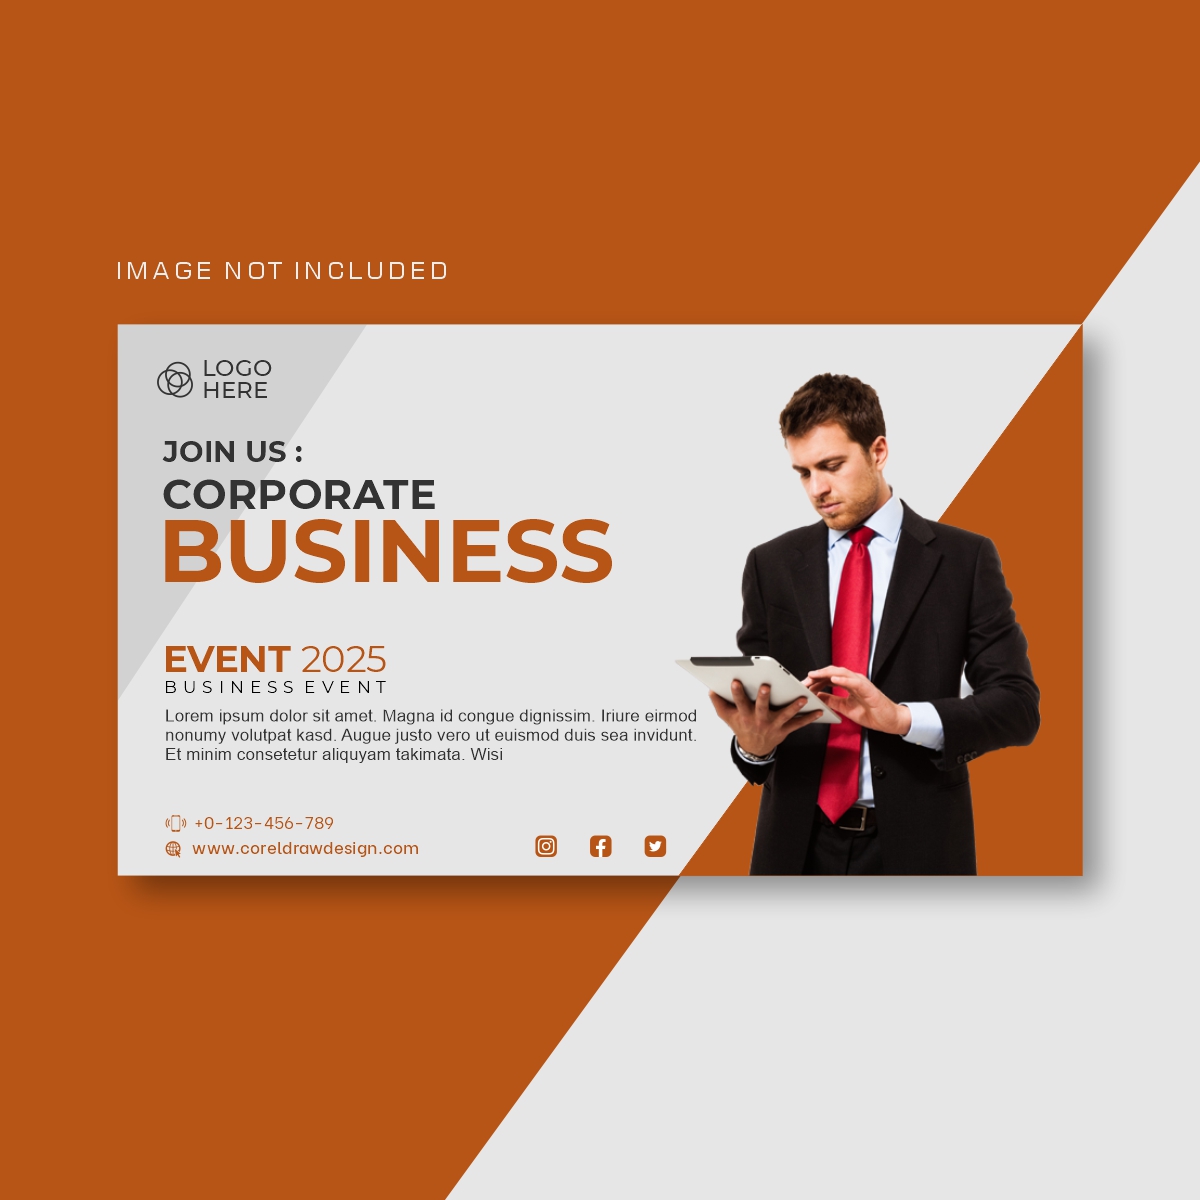 Business Event Banner Concept With Man Working Free Vector